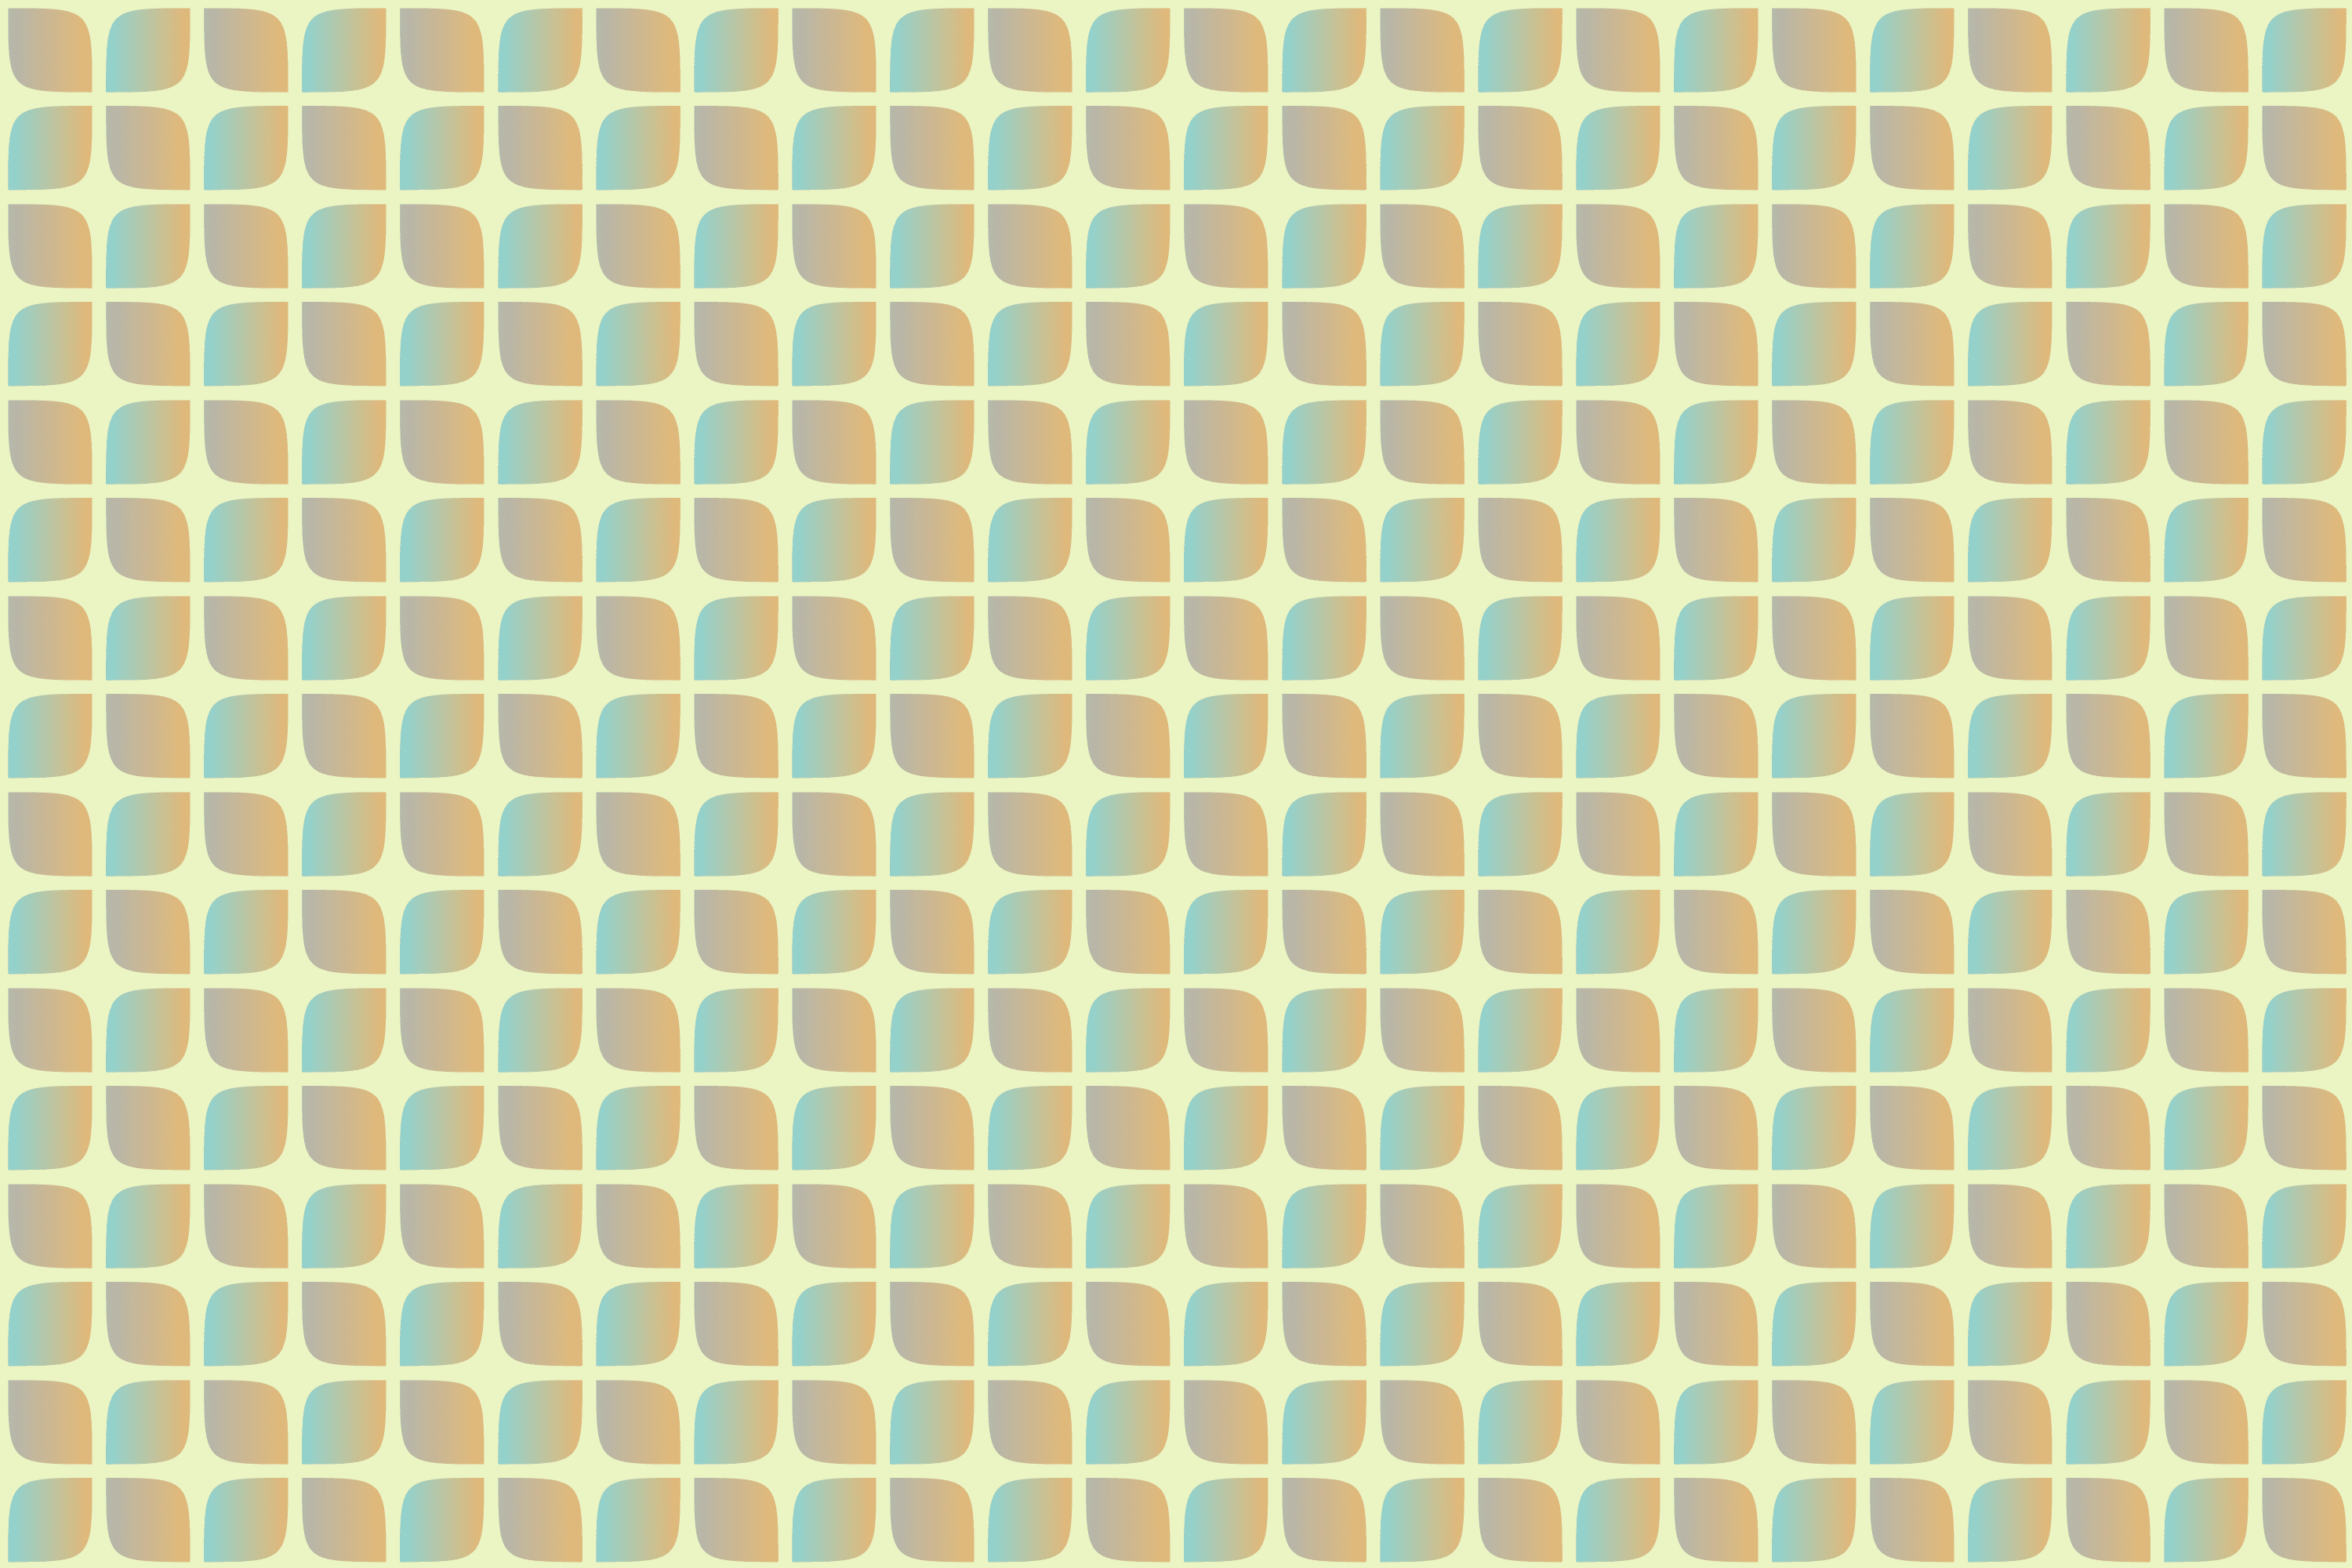 70s retro rounded connected shapes seamless wallpaper